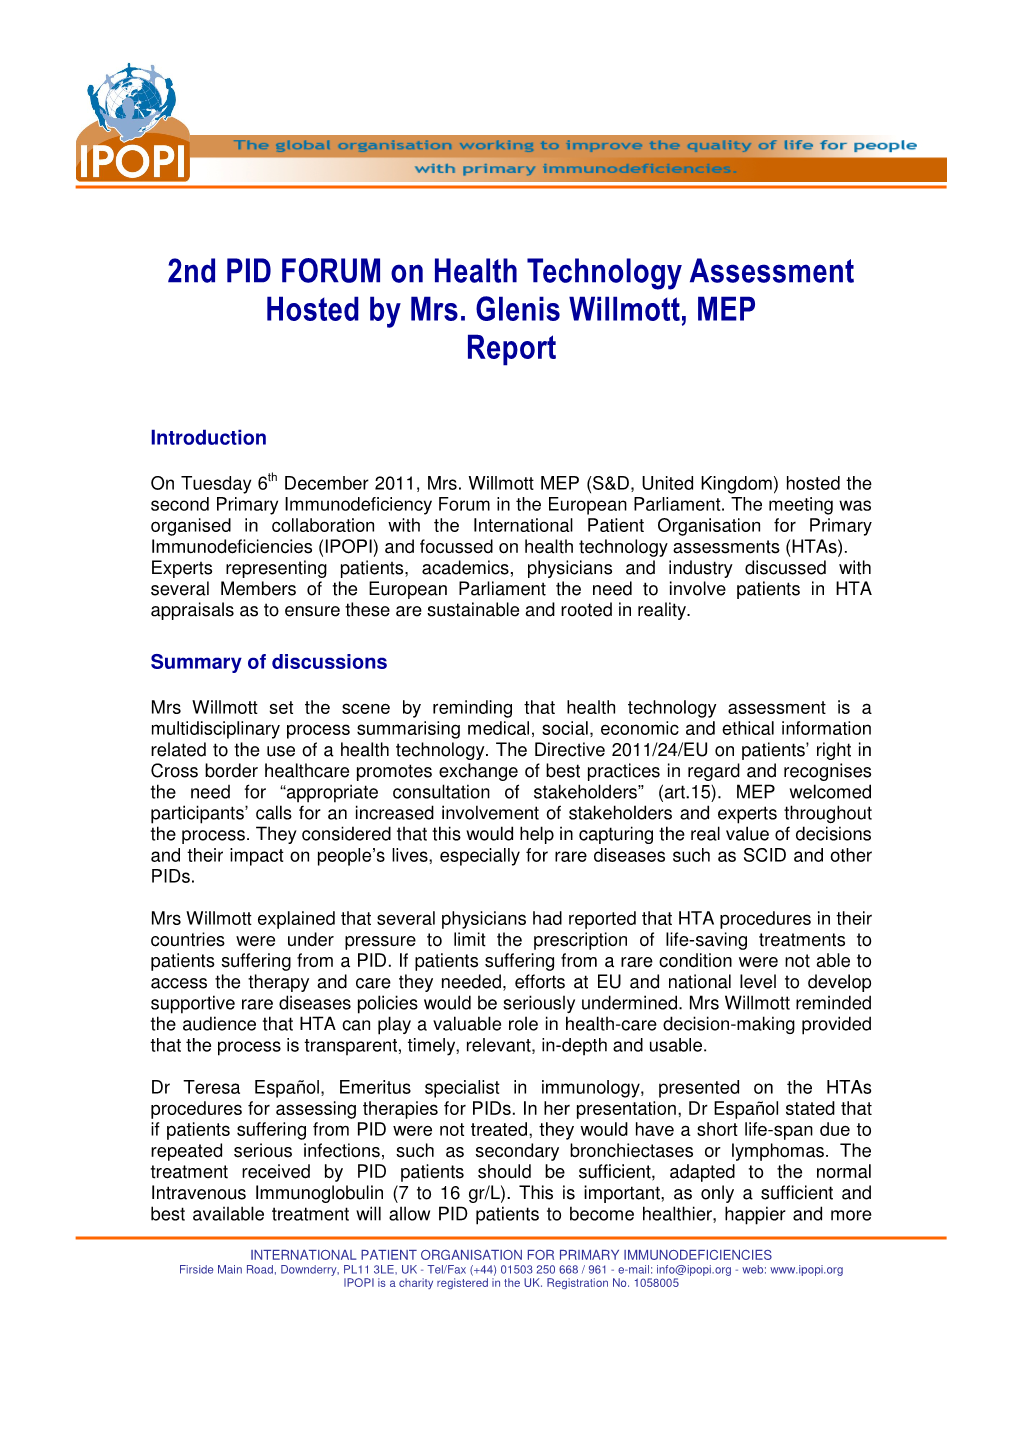 2Nd PID FORUM on Health Technology Assessment Hosted by Mrs